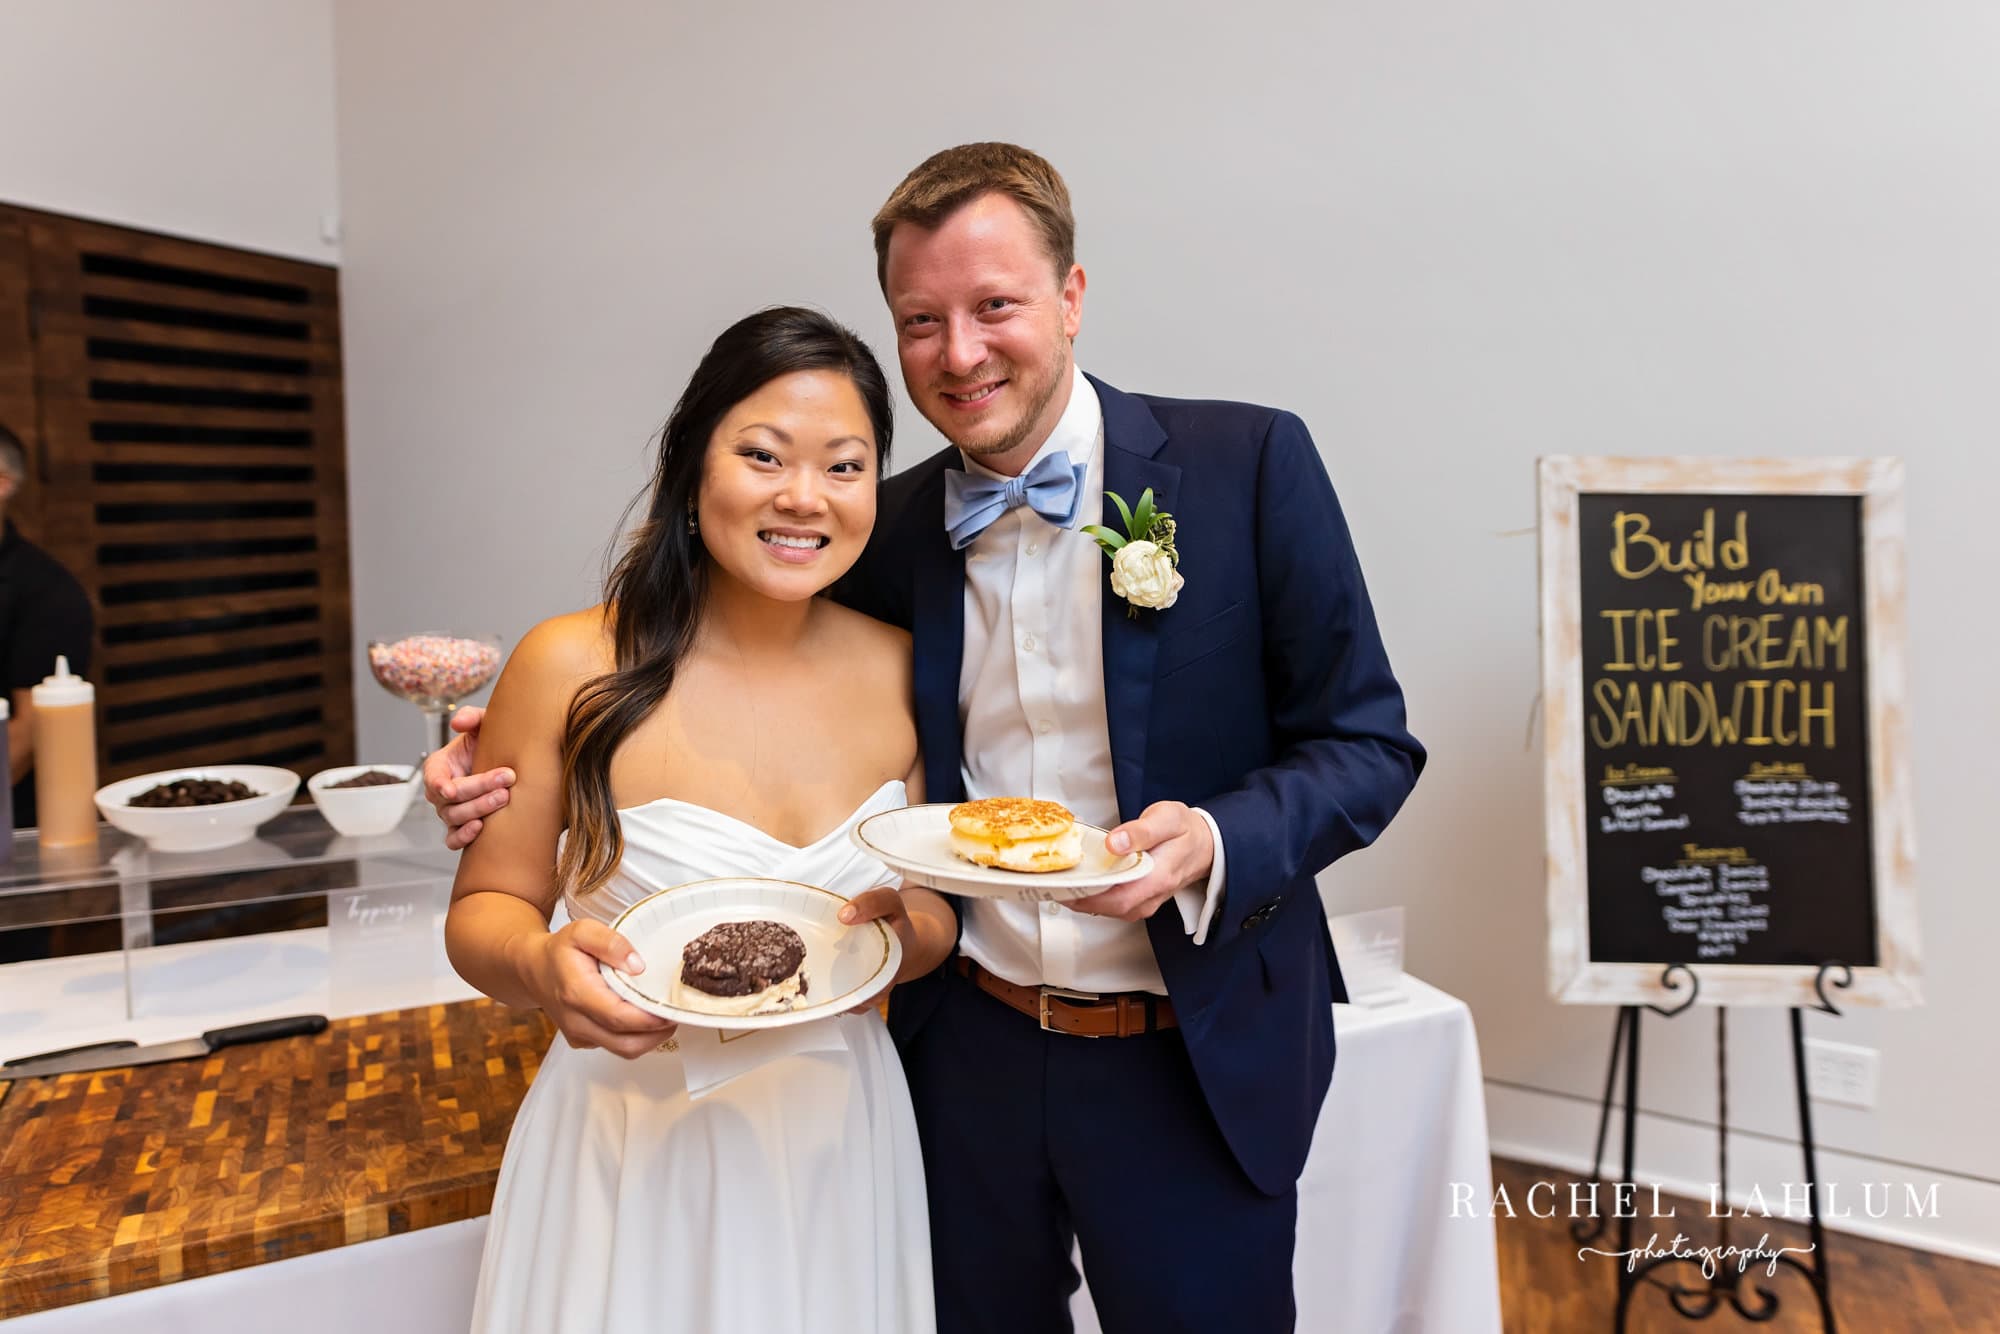 Bride and groom hold plates of desserts at the ice cream sandwich station during their reception at The Blaisdell.